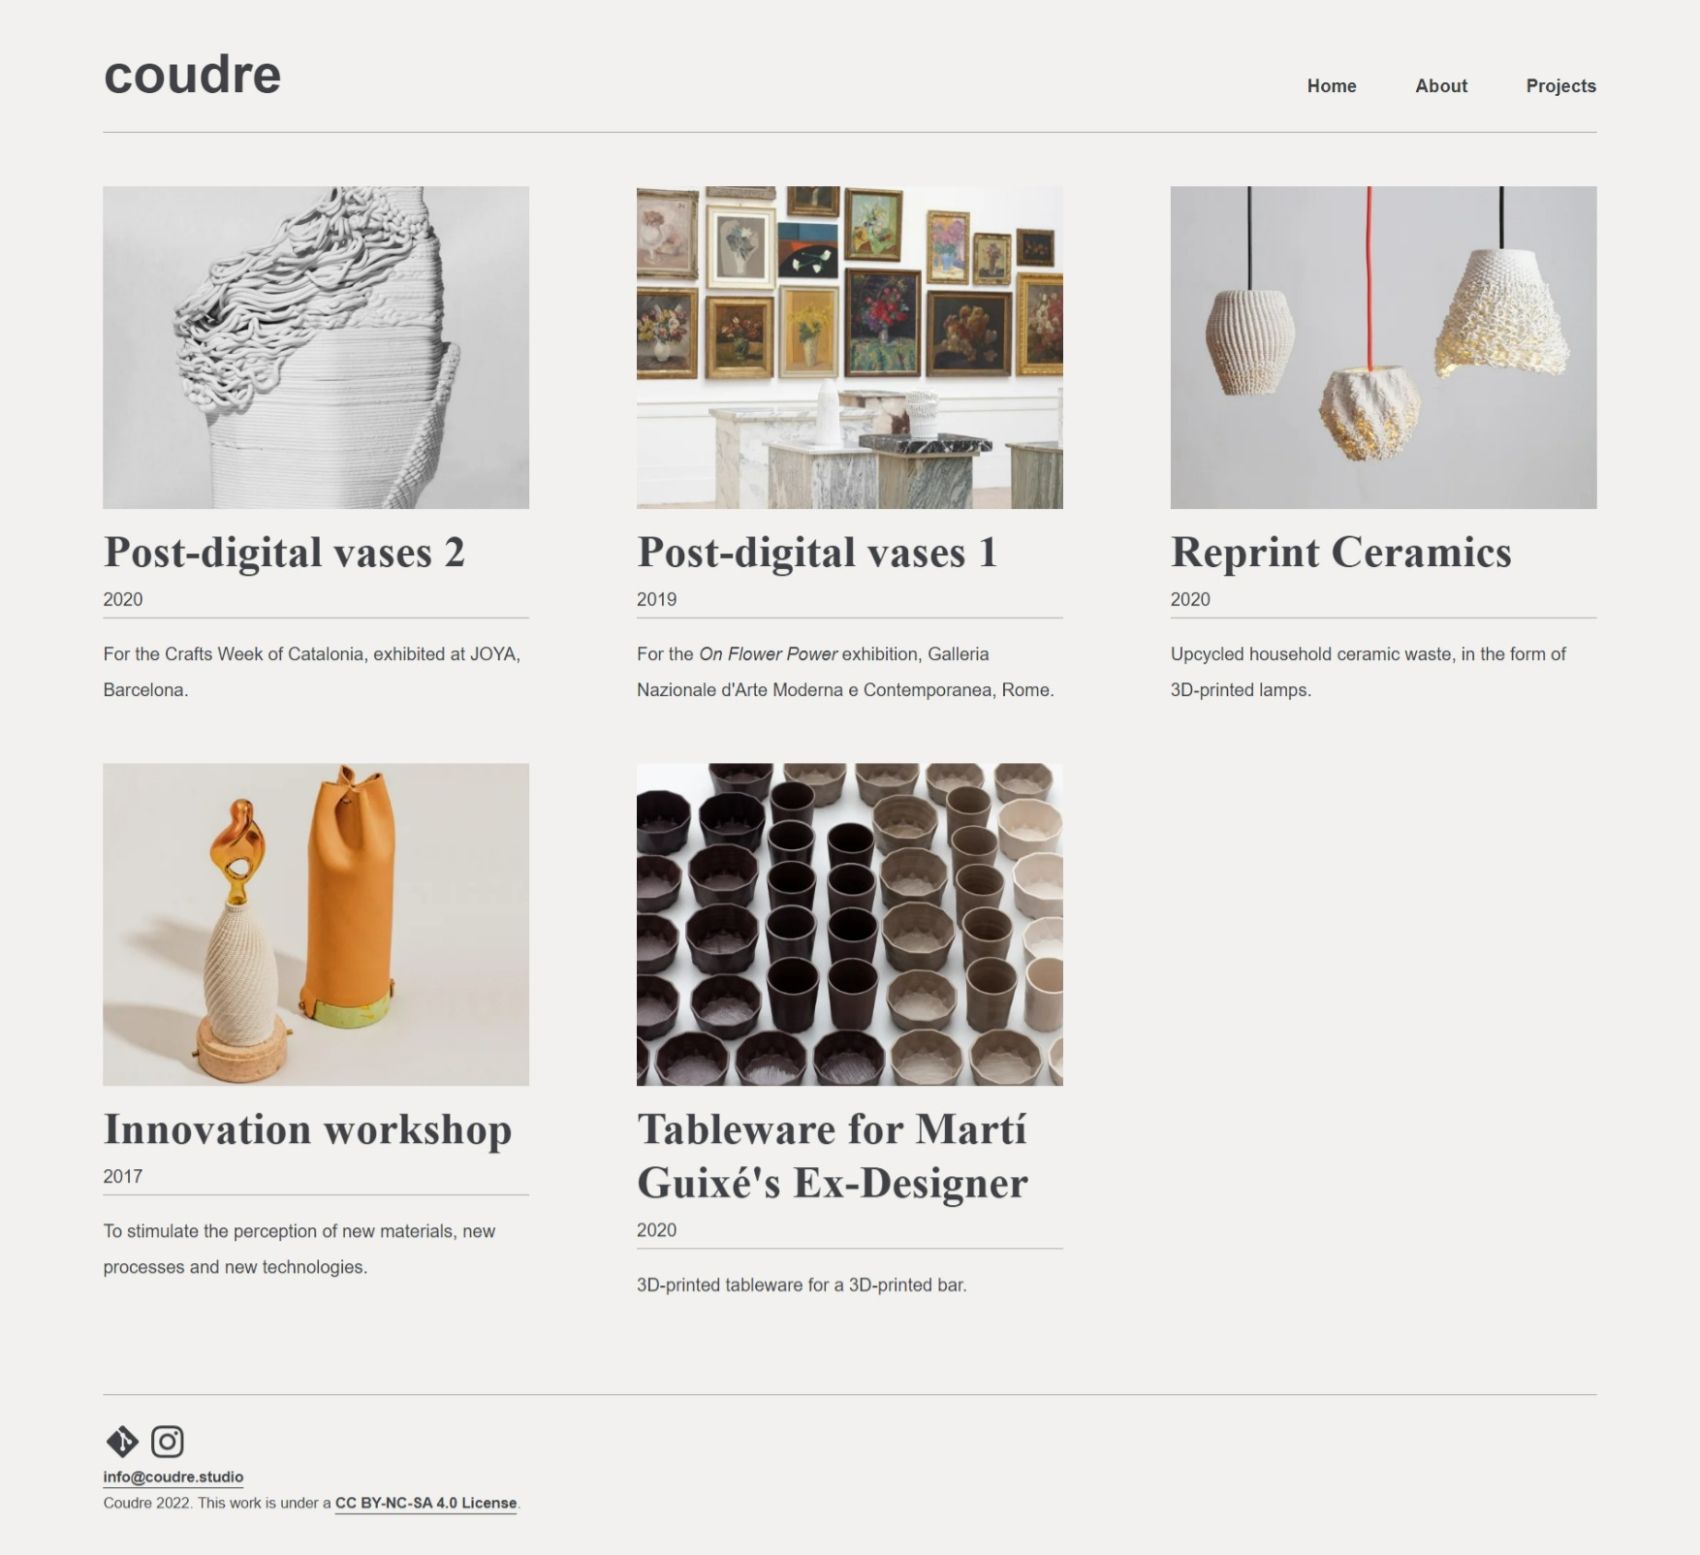 Screenshot of the Coudre Studio website projects page. The project cards are ordered in a grid-like fashion.